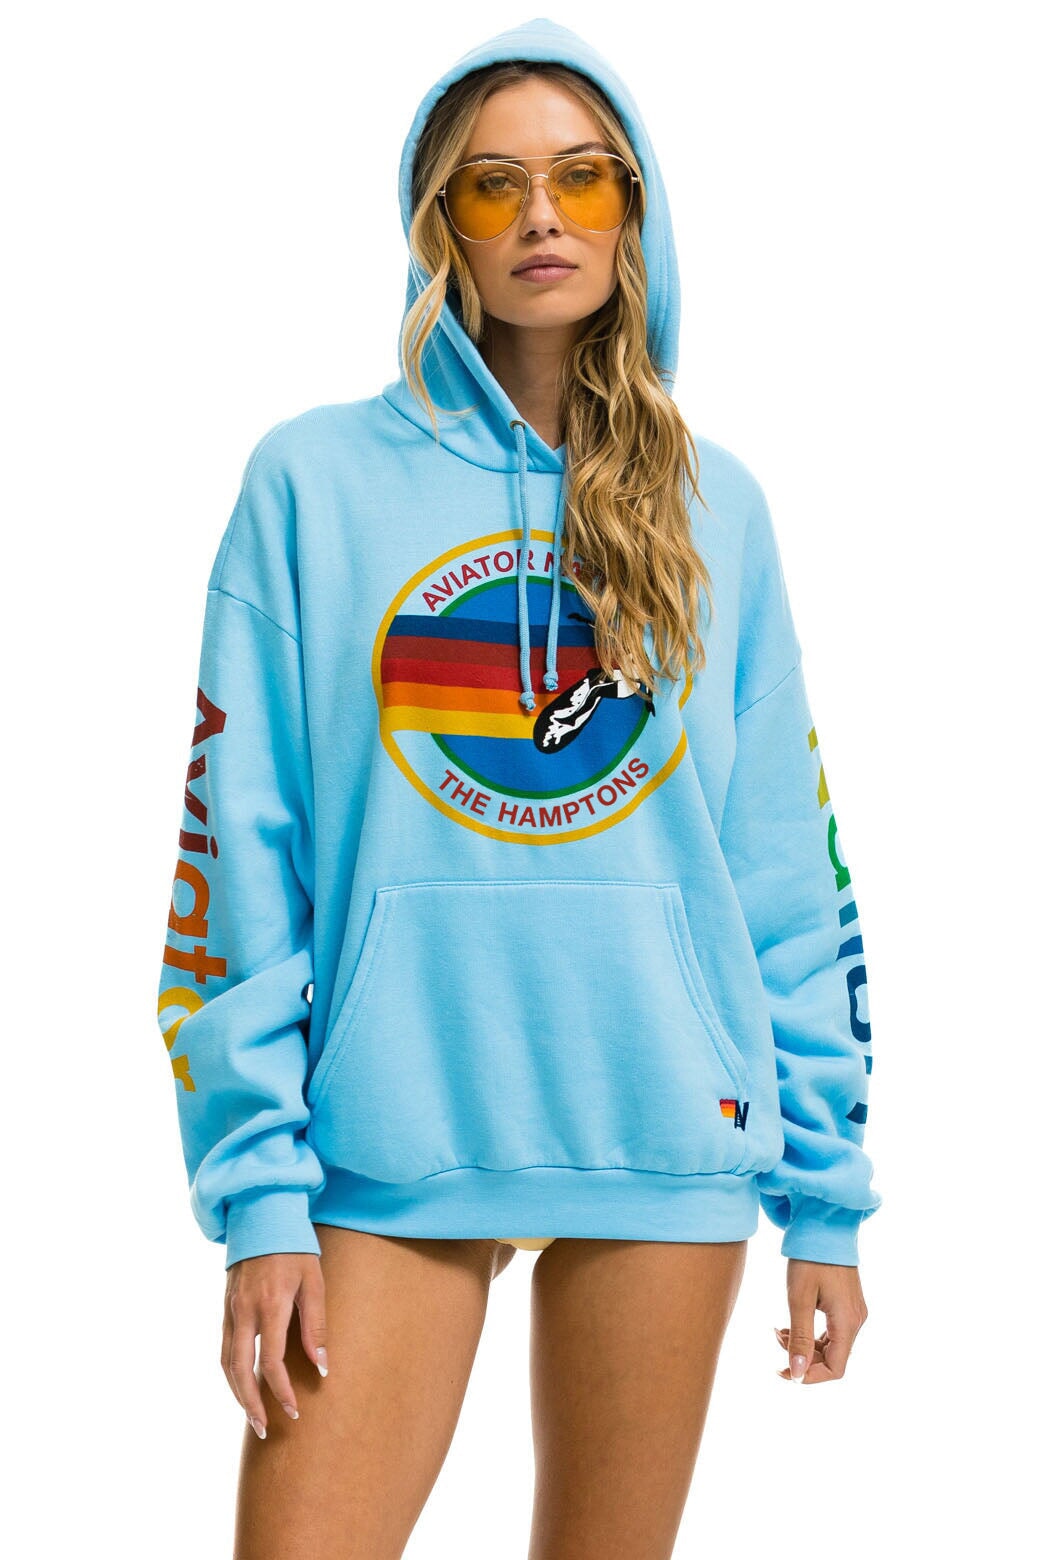 AVIATOR NATION THE HAMPTONS RELAXED PULLOVER HOODIE - SKY Hoodie Aviator Nation 